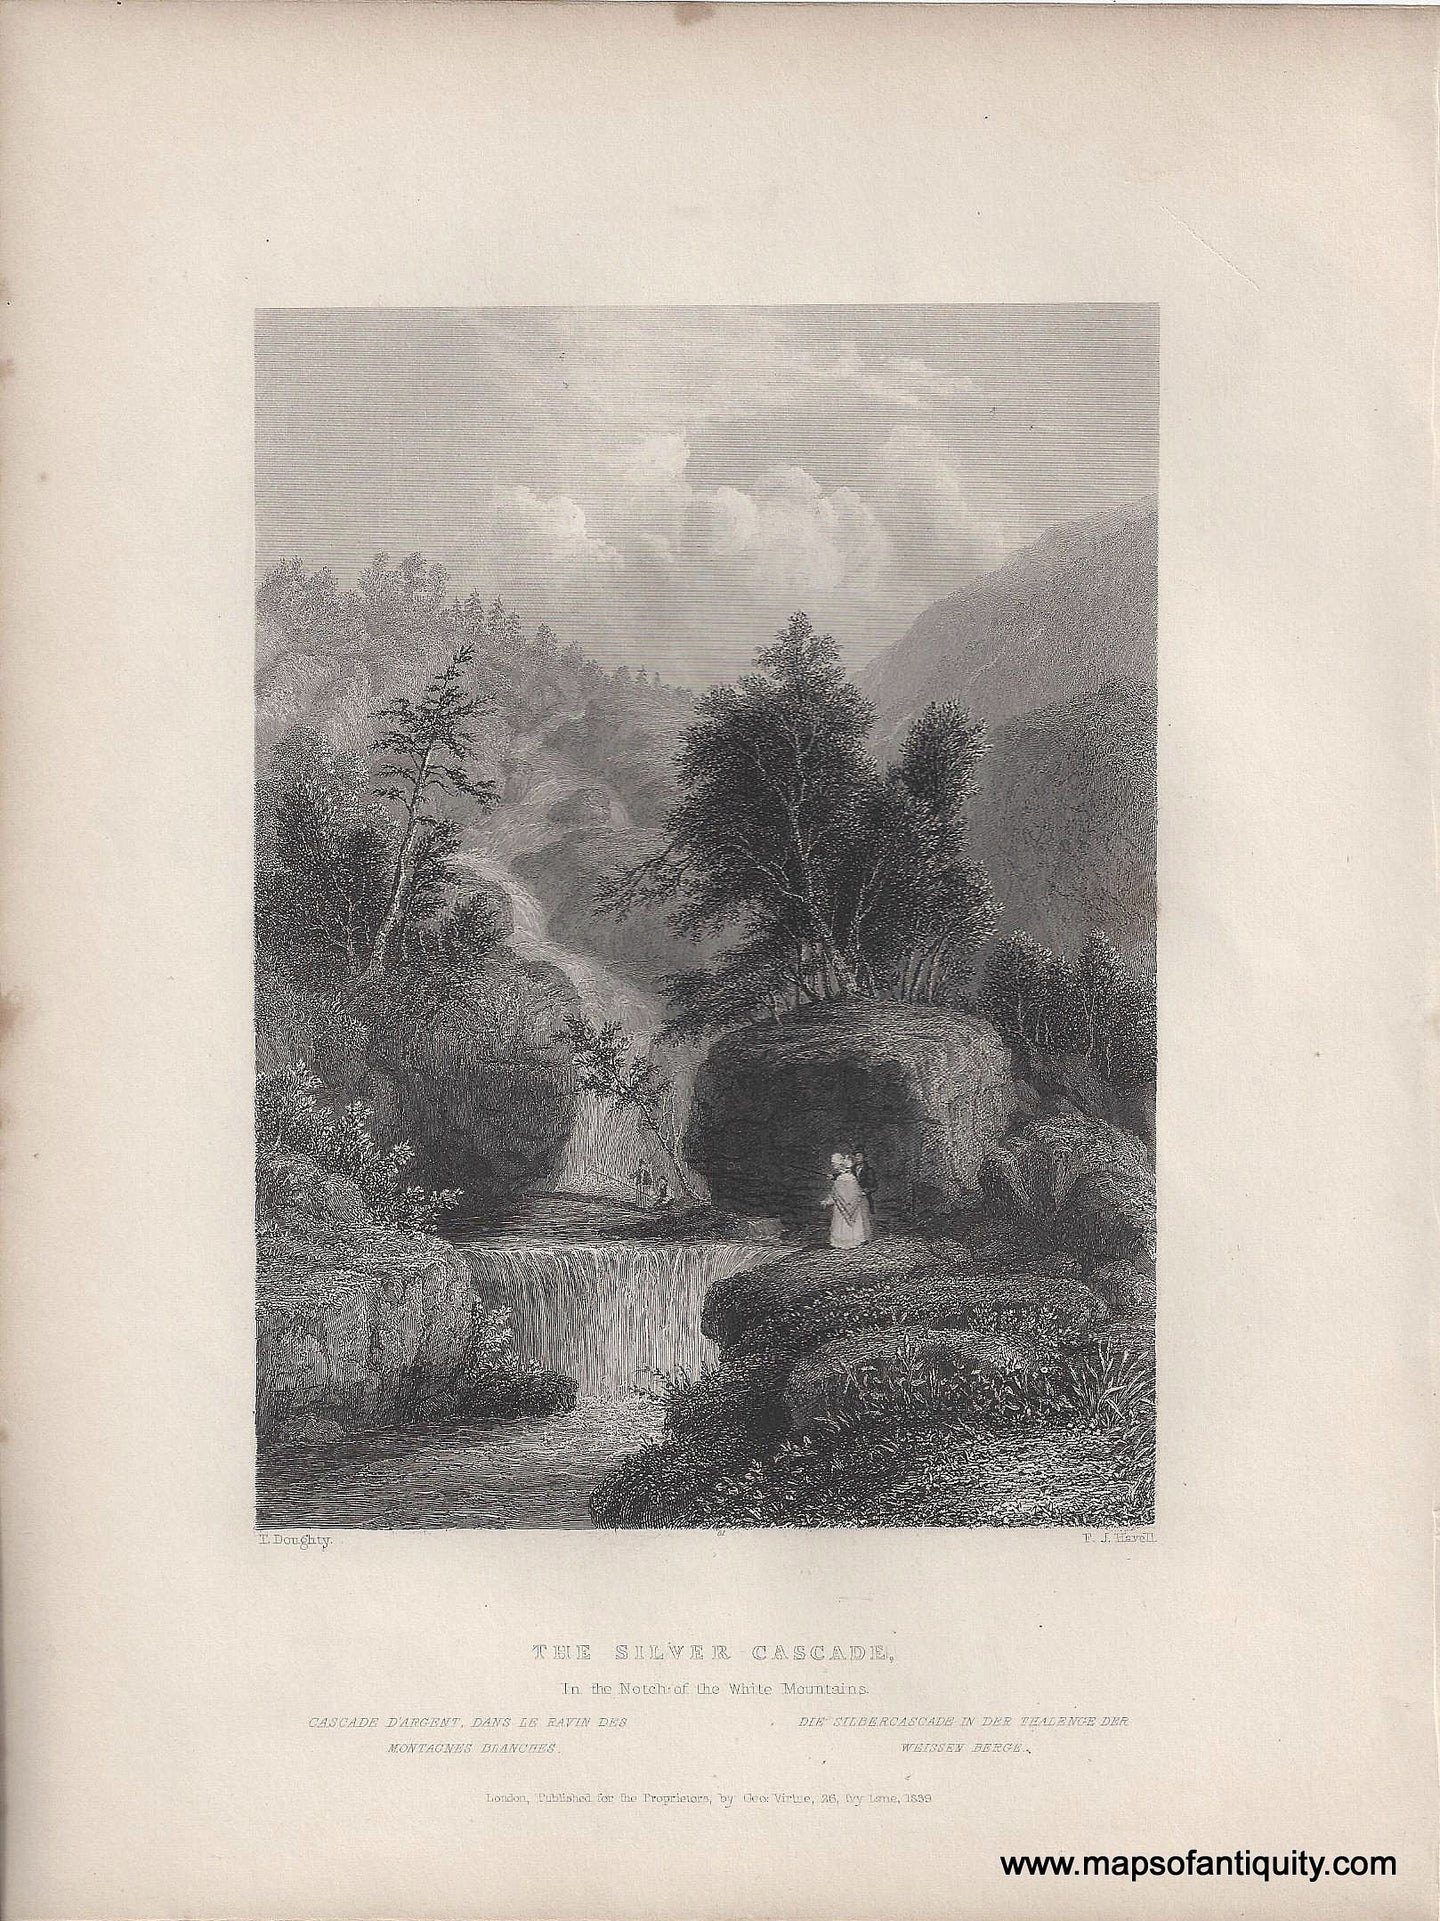 Genuine-Antique-Print-The-Silver-Cascade-In-the-Notch-of-the-White-Mountains-1839-Bartlett-Maps-Of-Antiquity